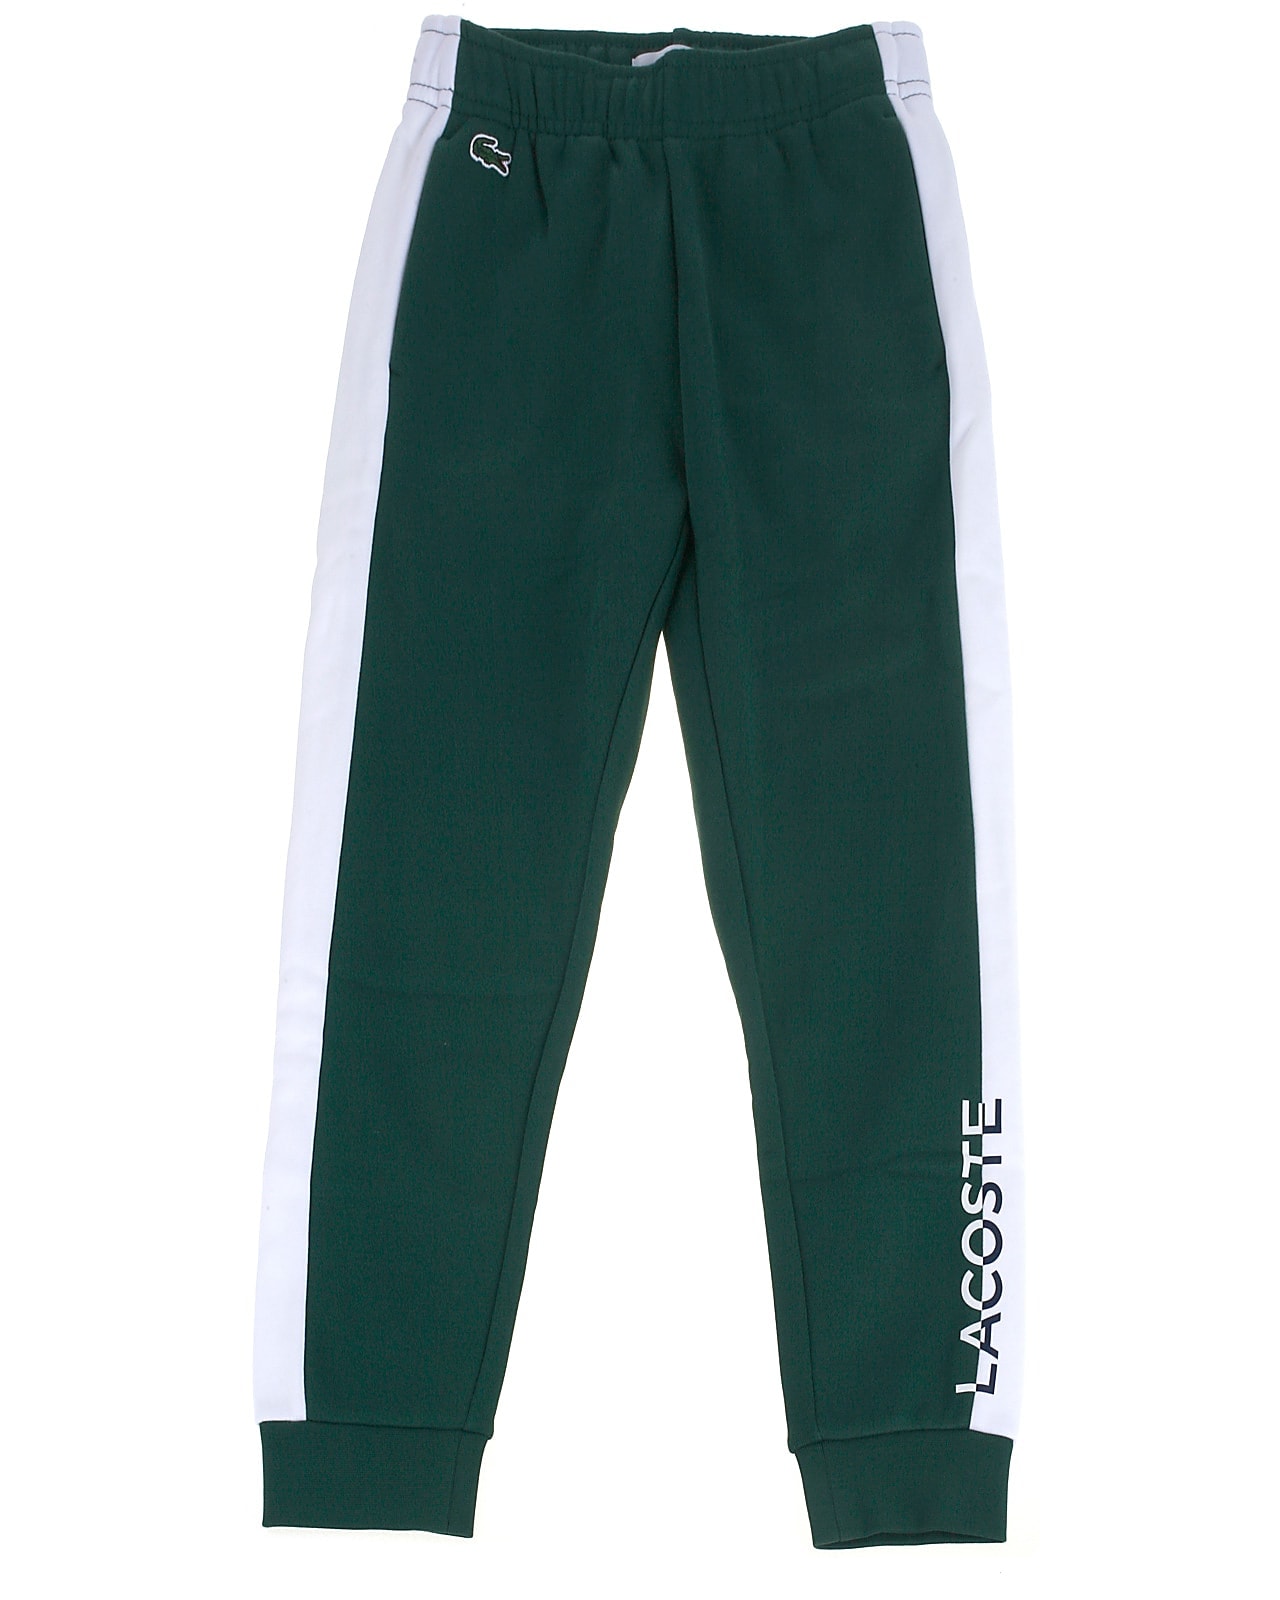 Image of Lacoste sweatpants, army